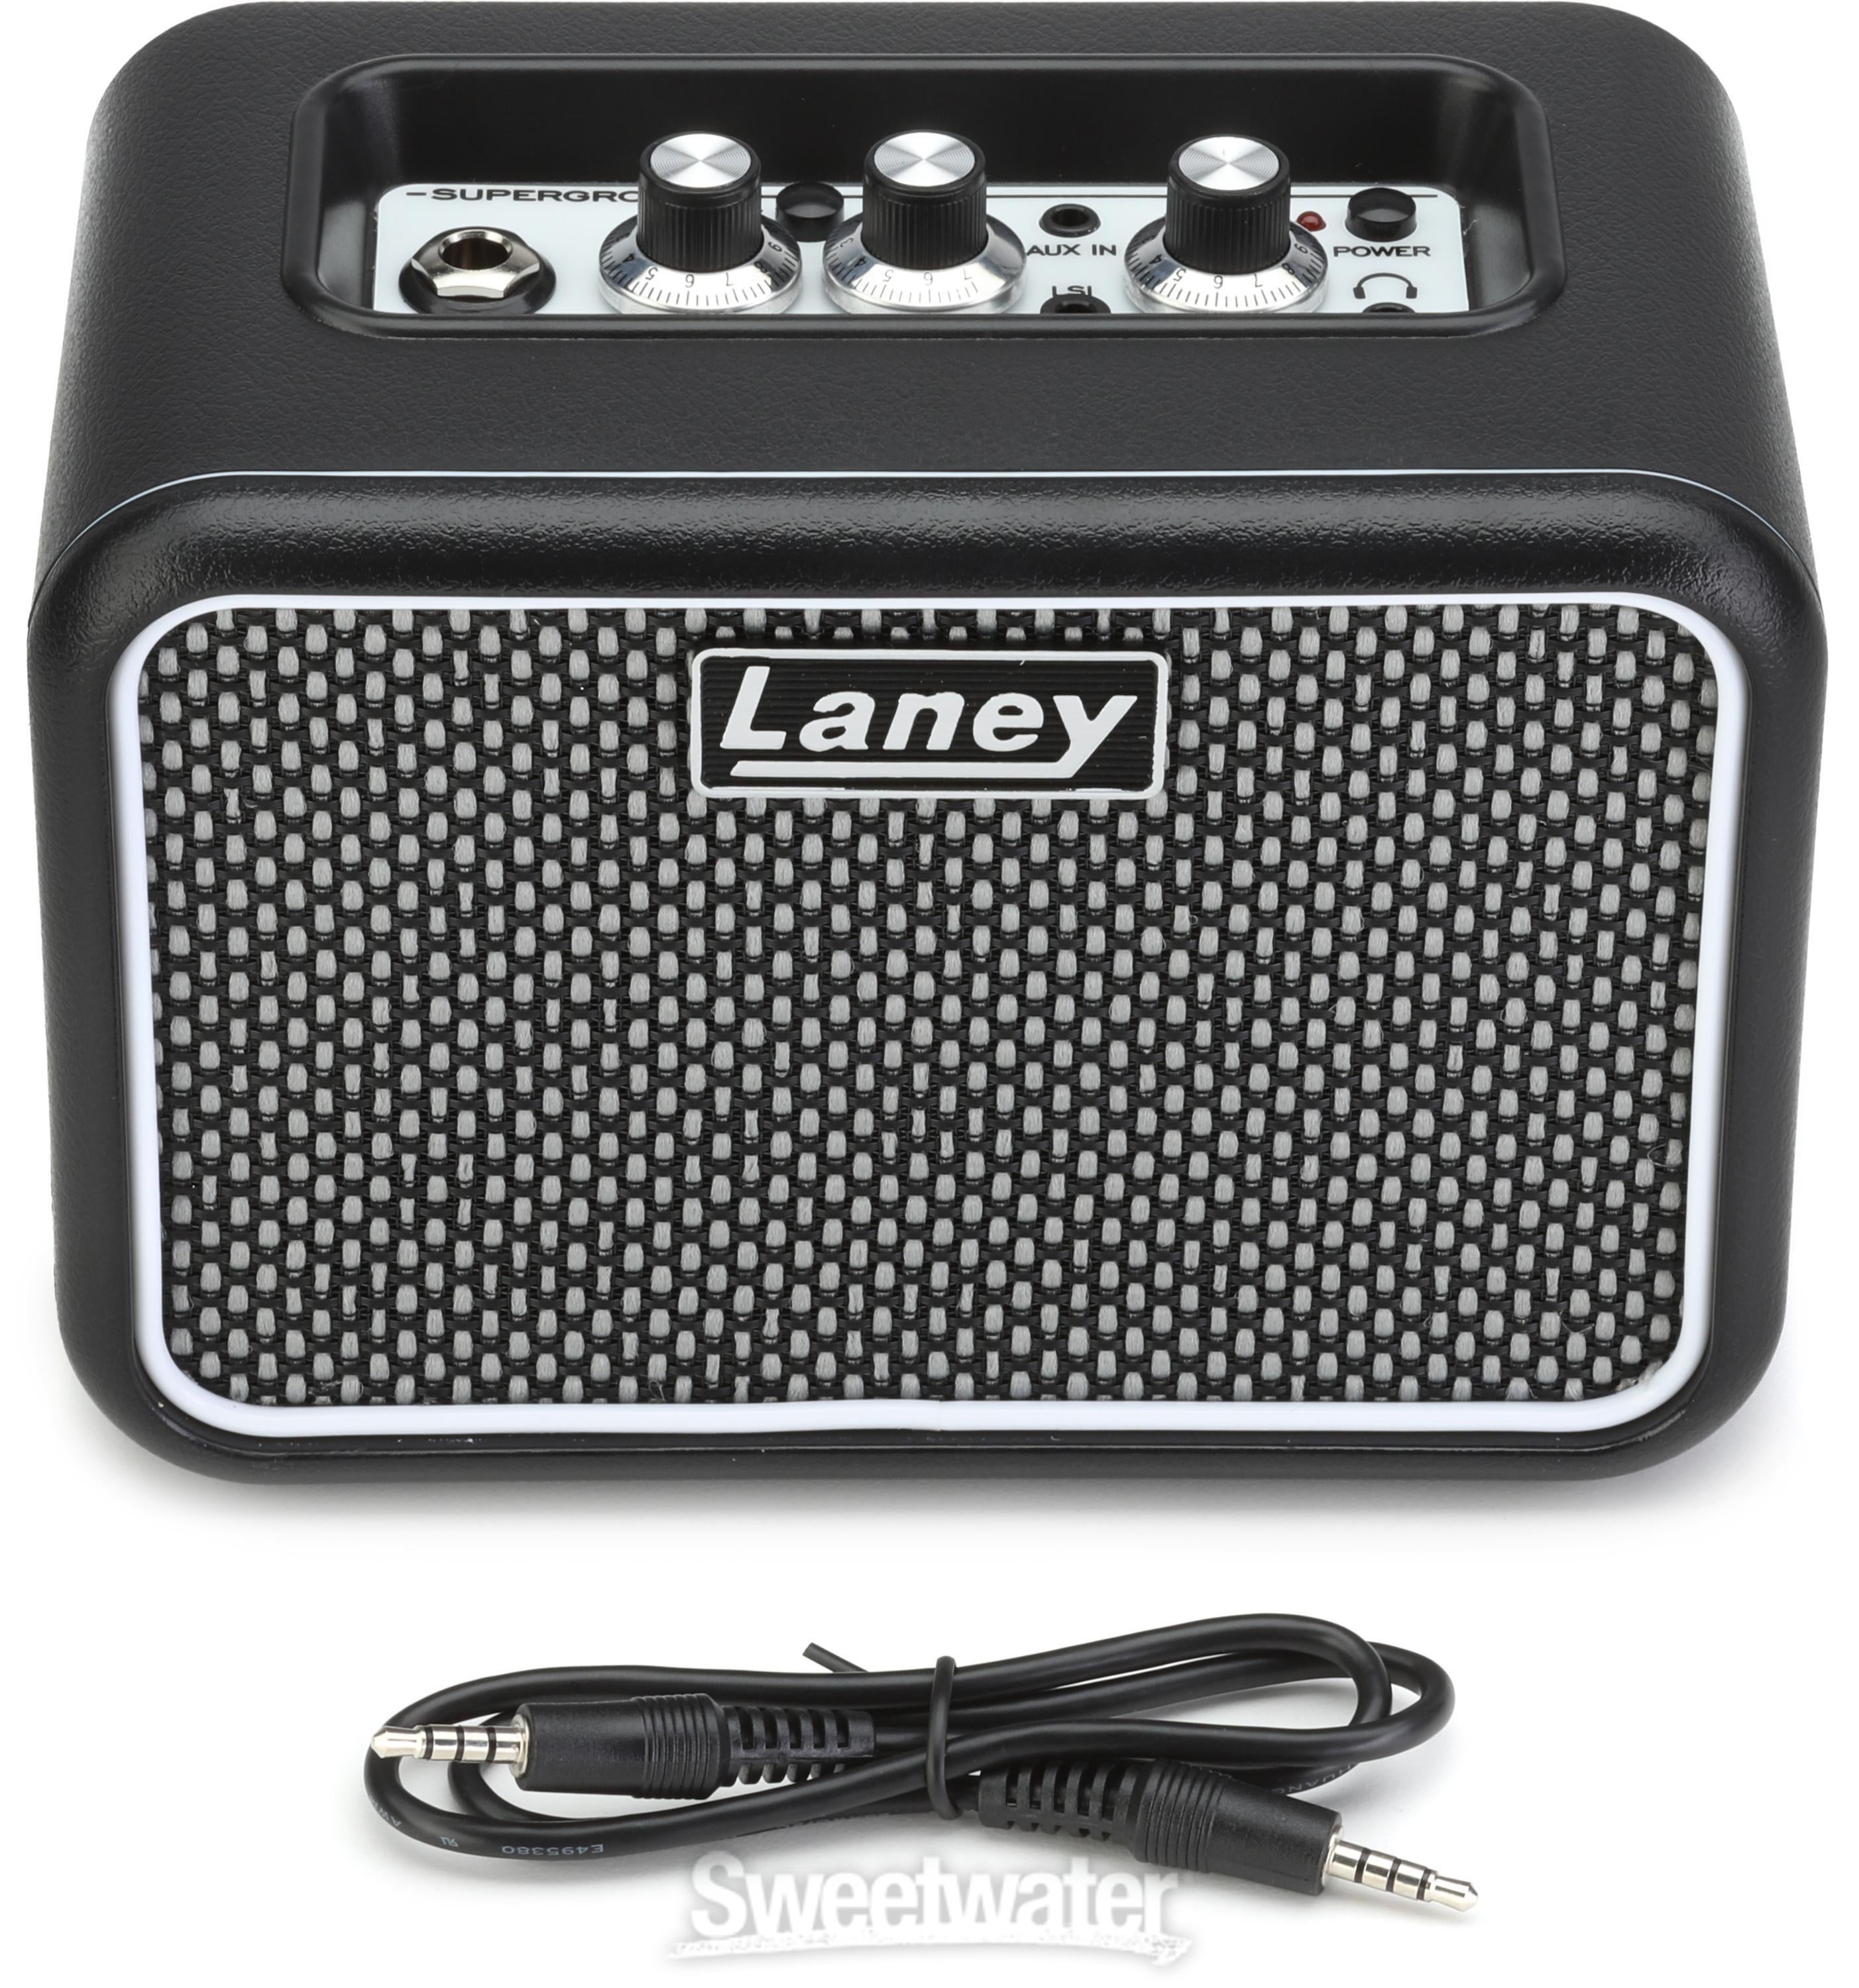 Mini-SuperG Battery-powered 1 x 3-inch Guitar Combo Amplifier